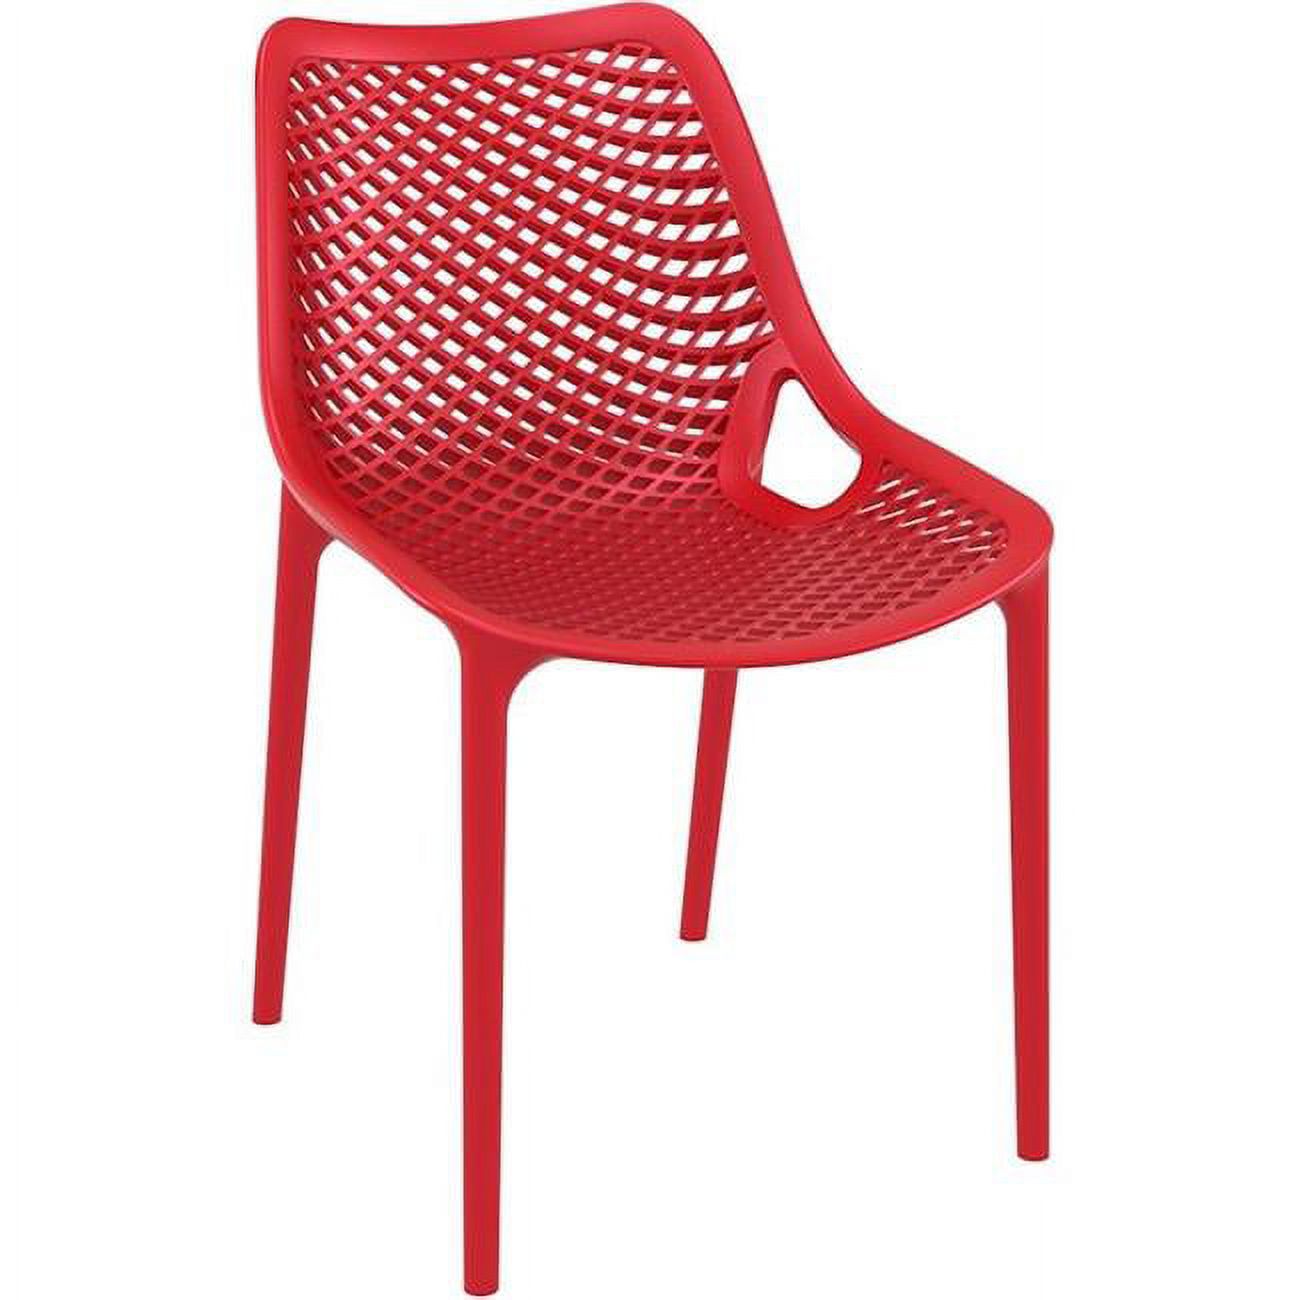 Air Outdoor Dining Chair  Red - Set of 2 - image 1 of 1